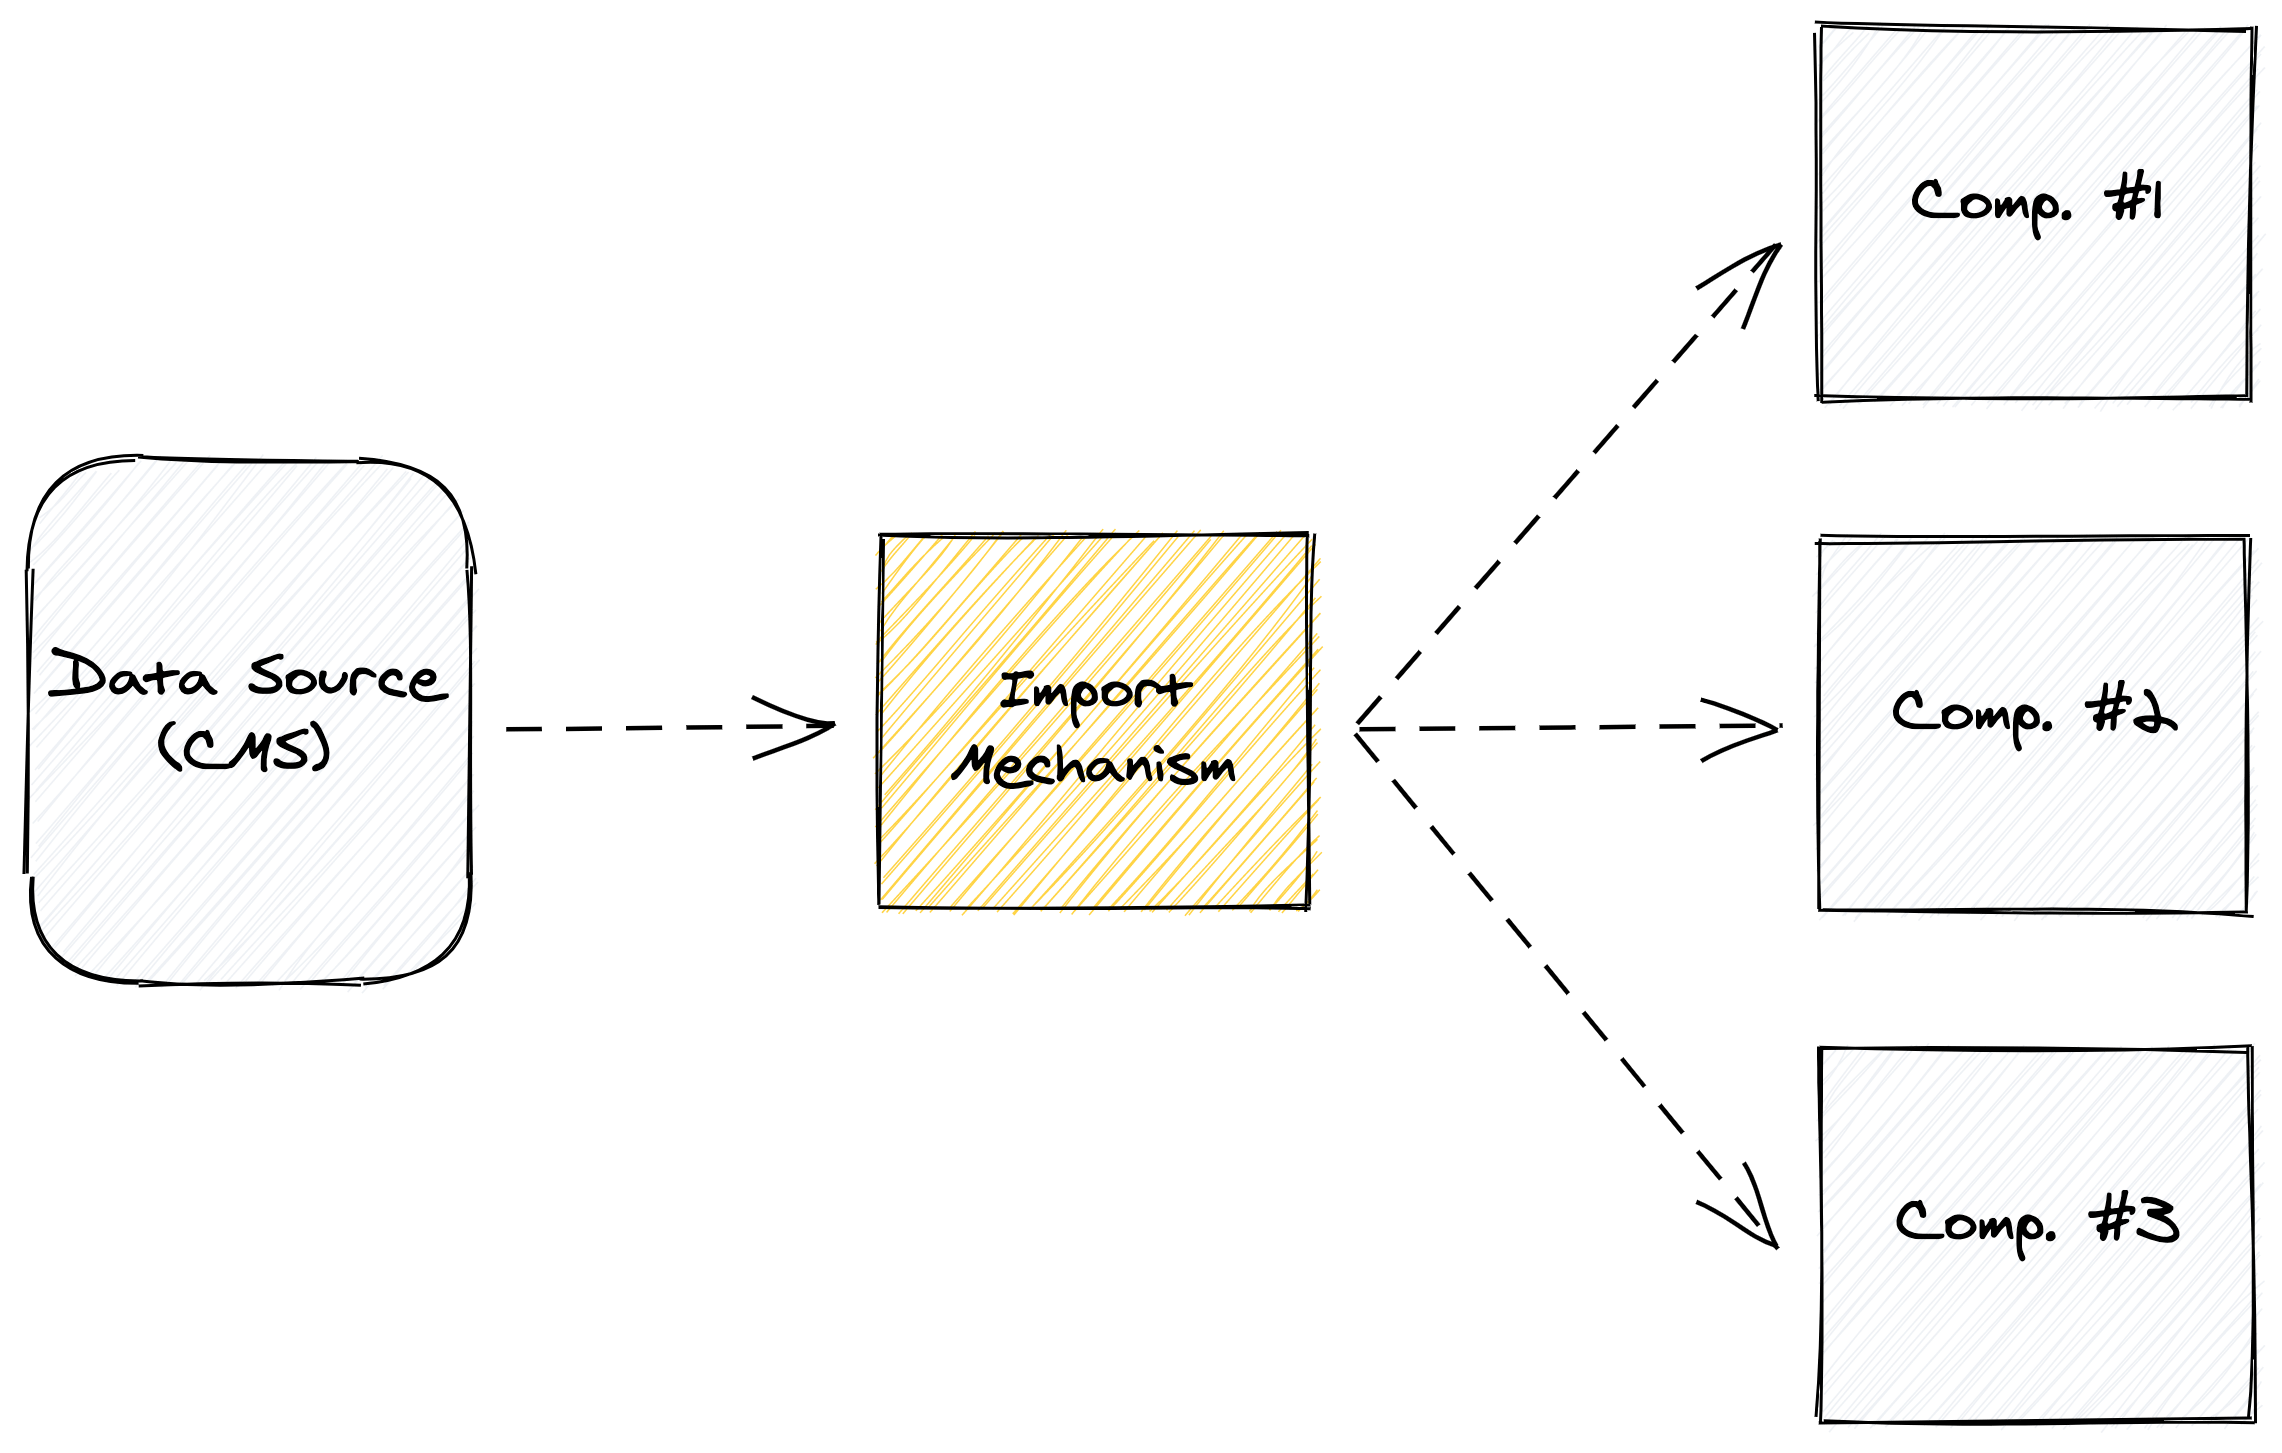 Another illustration, this time where the yellow box is labeled import mechanism, and it has three arrows, each pointing to a white square, labeled, component 1, component 2, and component 3, respectively.